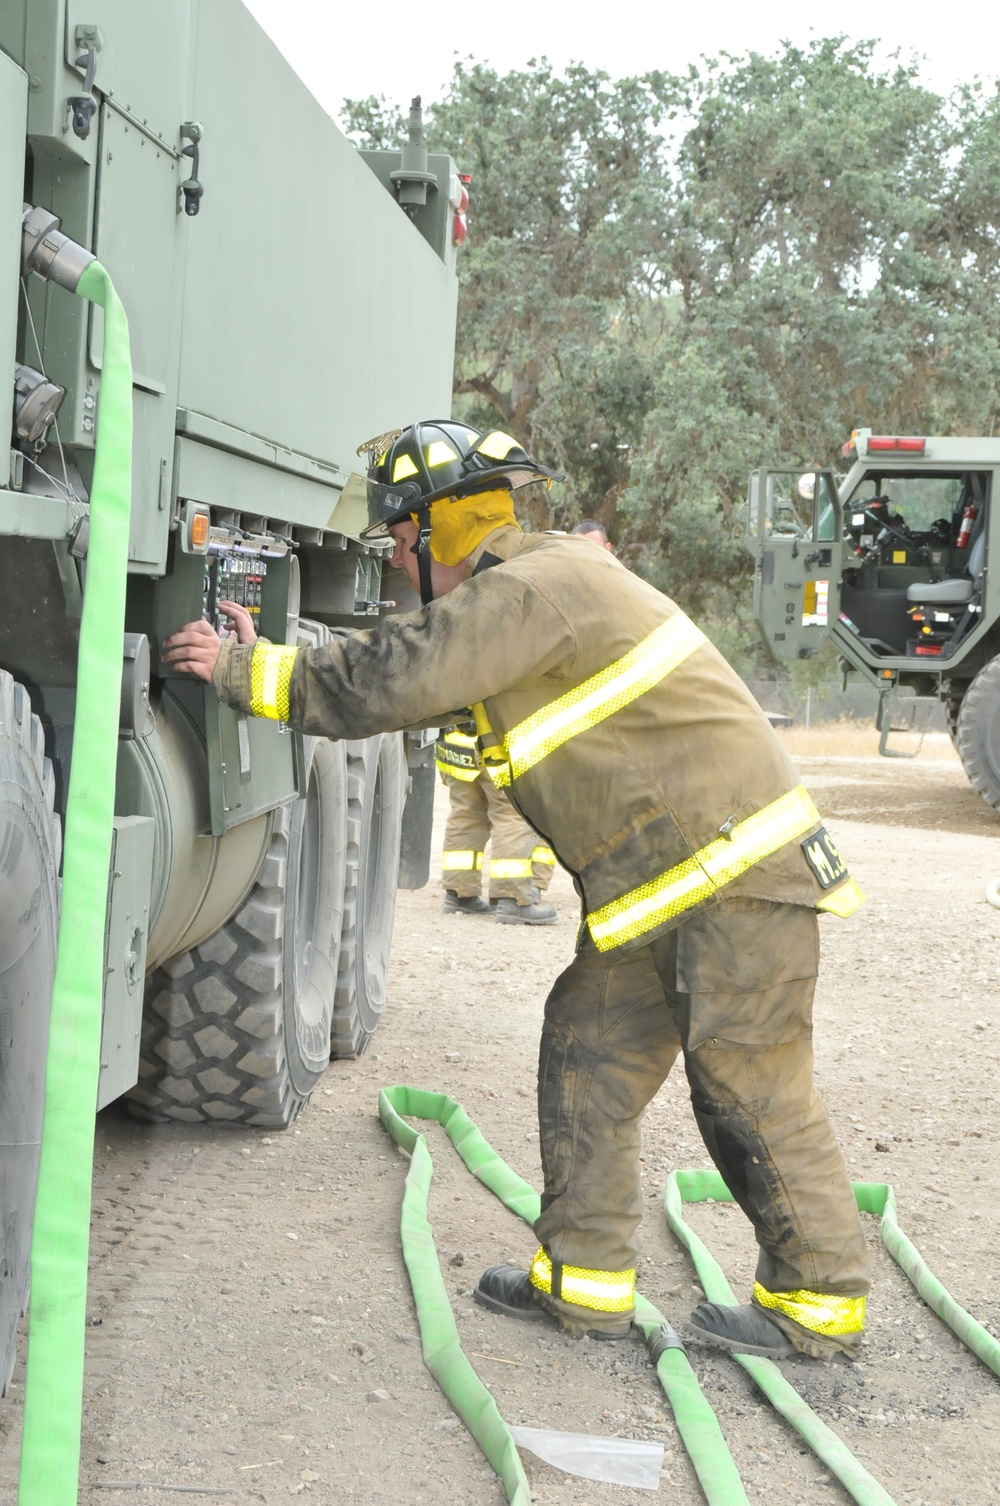 World-class fire training at FHL for military and civilian firefighters